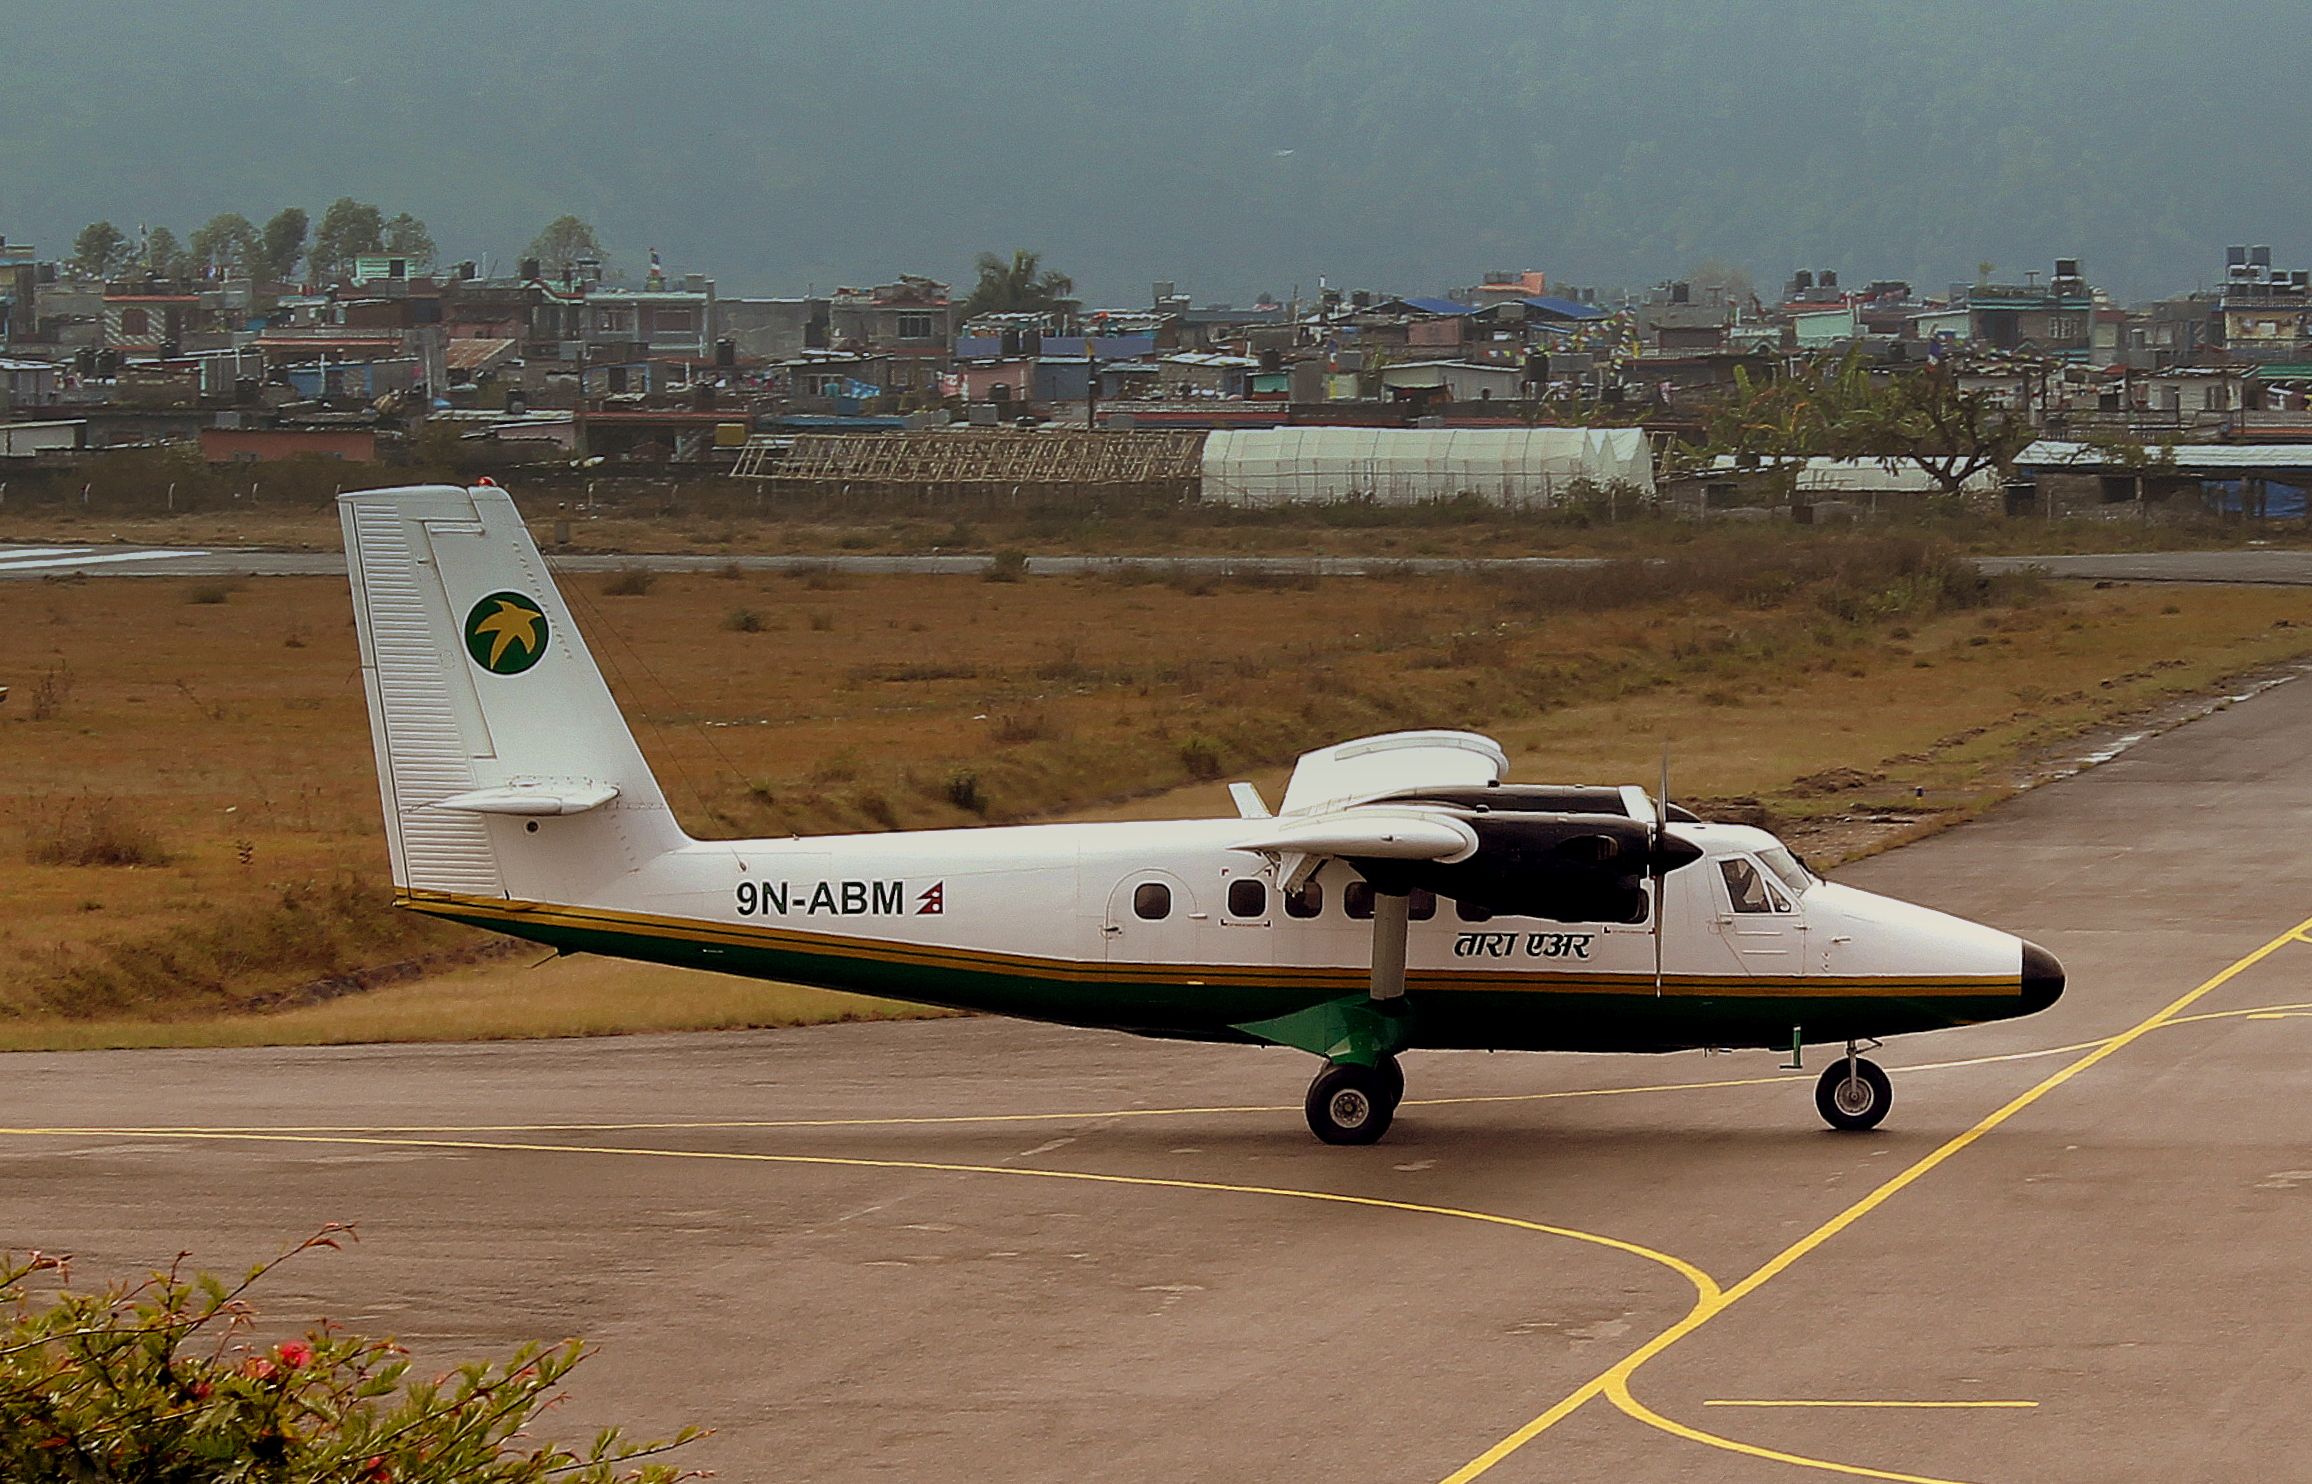 9N-ABM_TARA_AIR_DHC_6_TWIN_OTTER_AT_POKHARA_RECENTLY_ARRIVED_FROM_JOMSON_AIRPORT_NEPAL_FEB_2013_(8569369692)